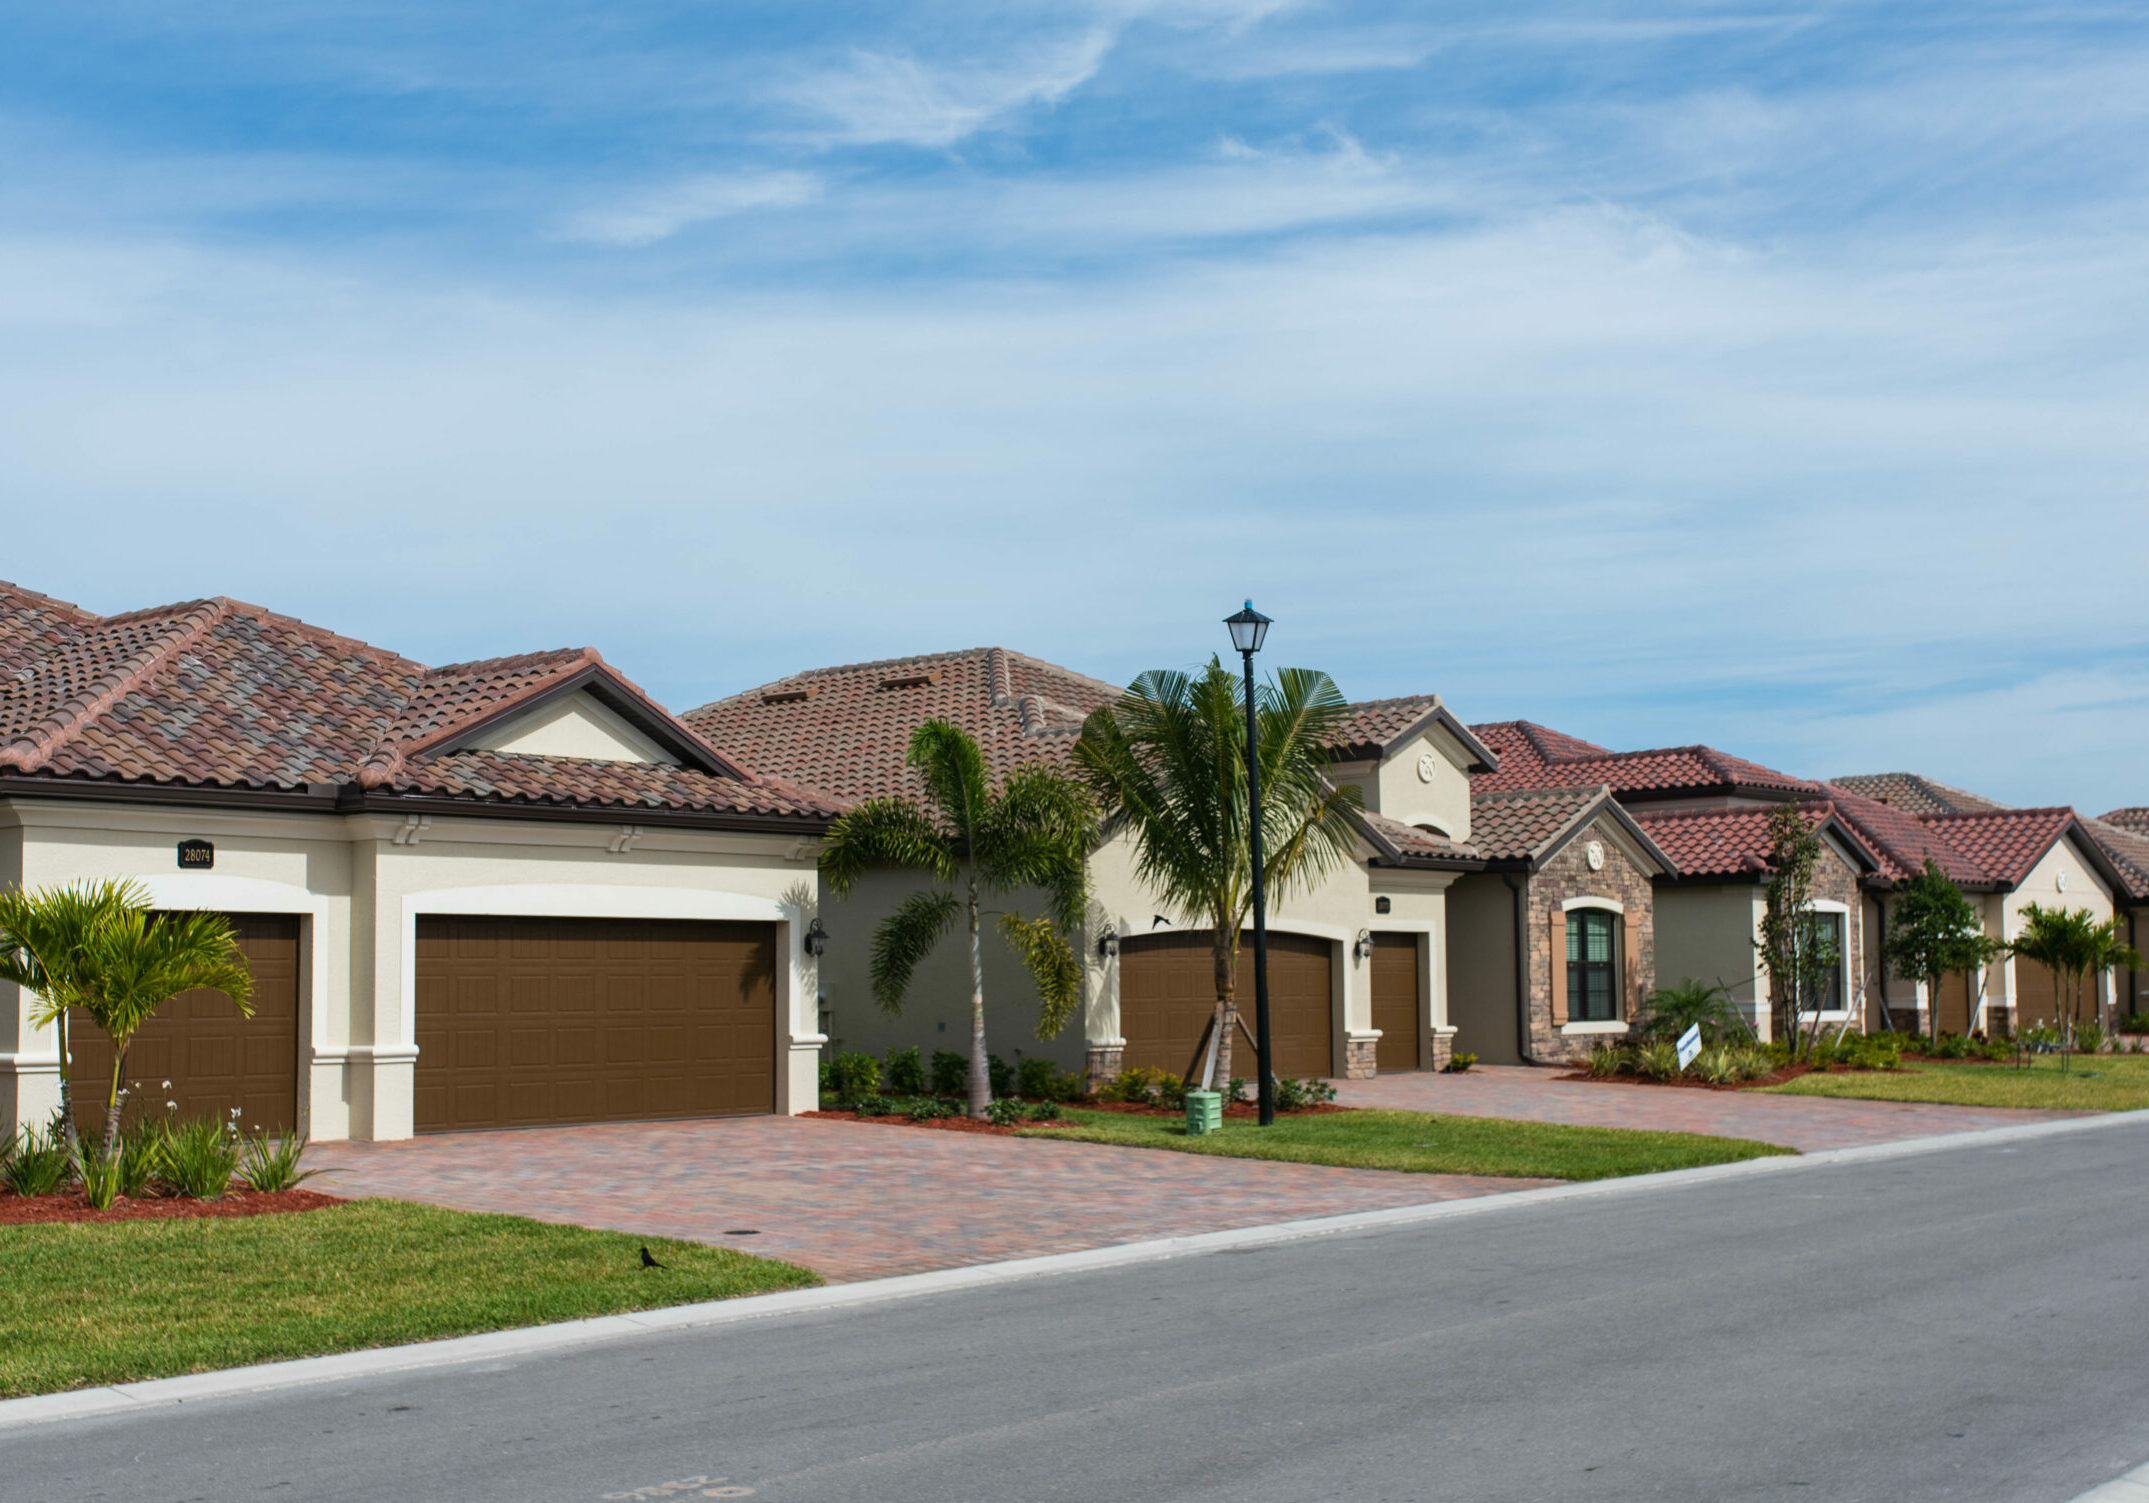 New houses and property developments in a Florida golf community